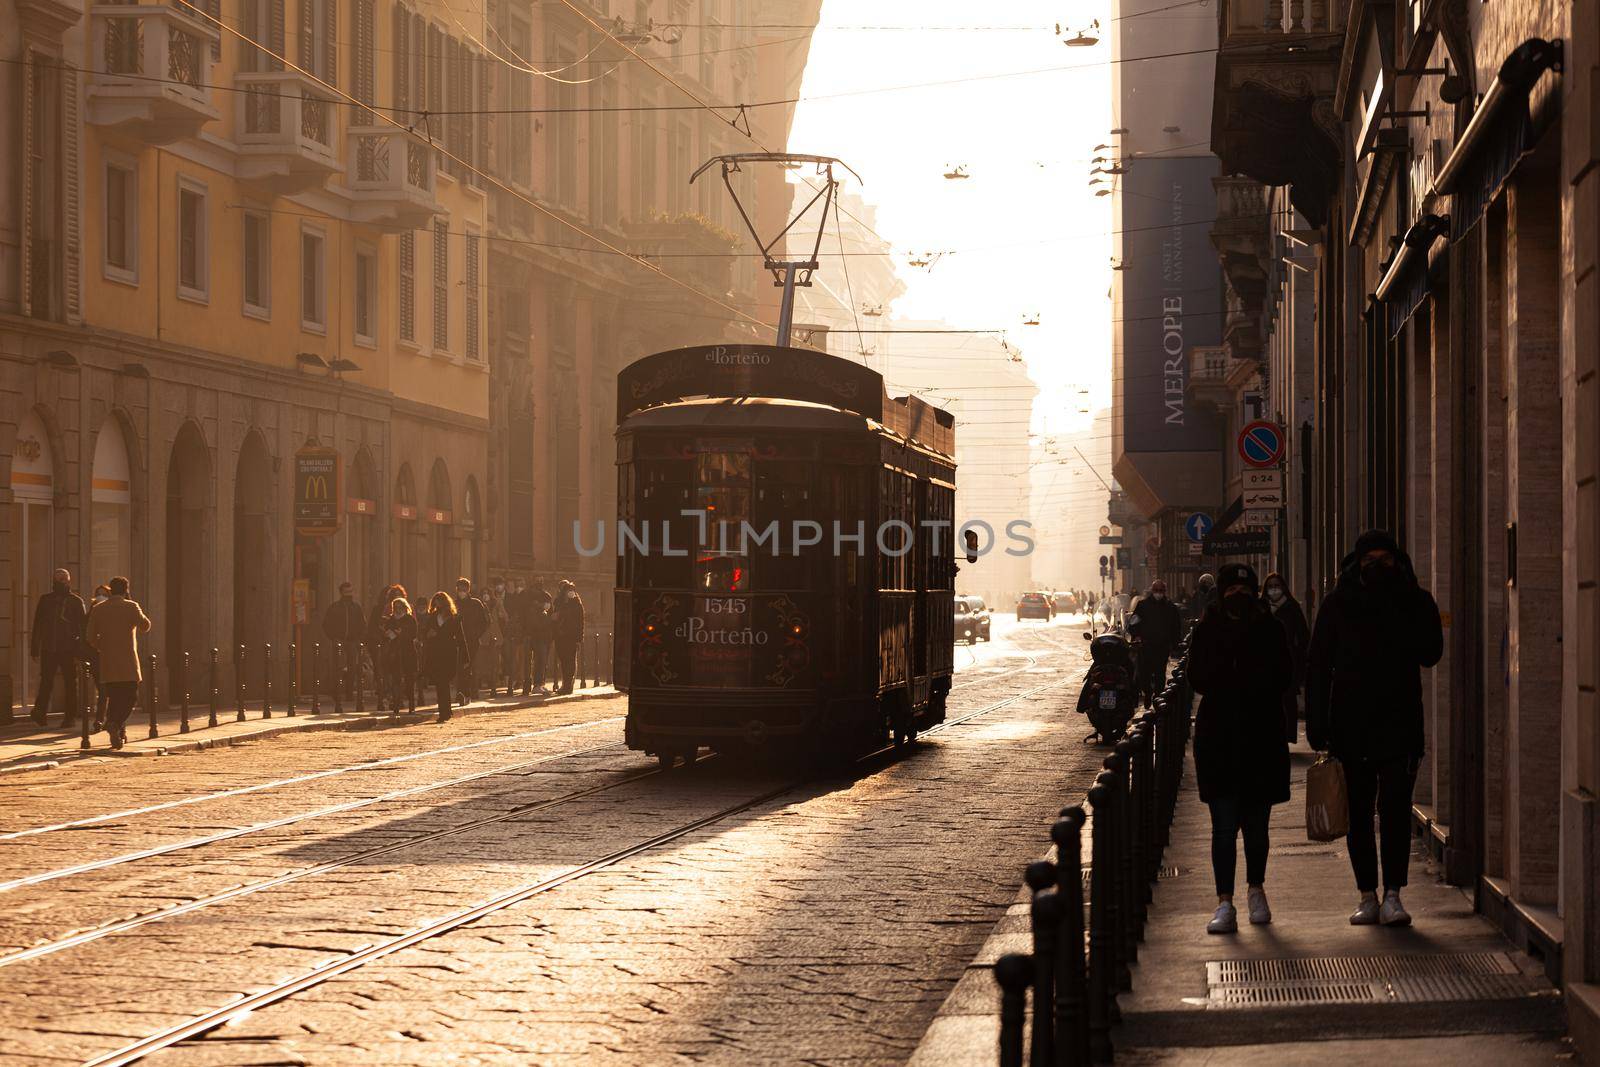 Milan, Italy - January 23, 2022: Old vintage tram on the street on January 23, 2022